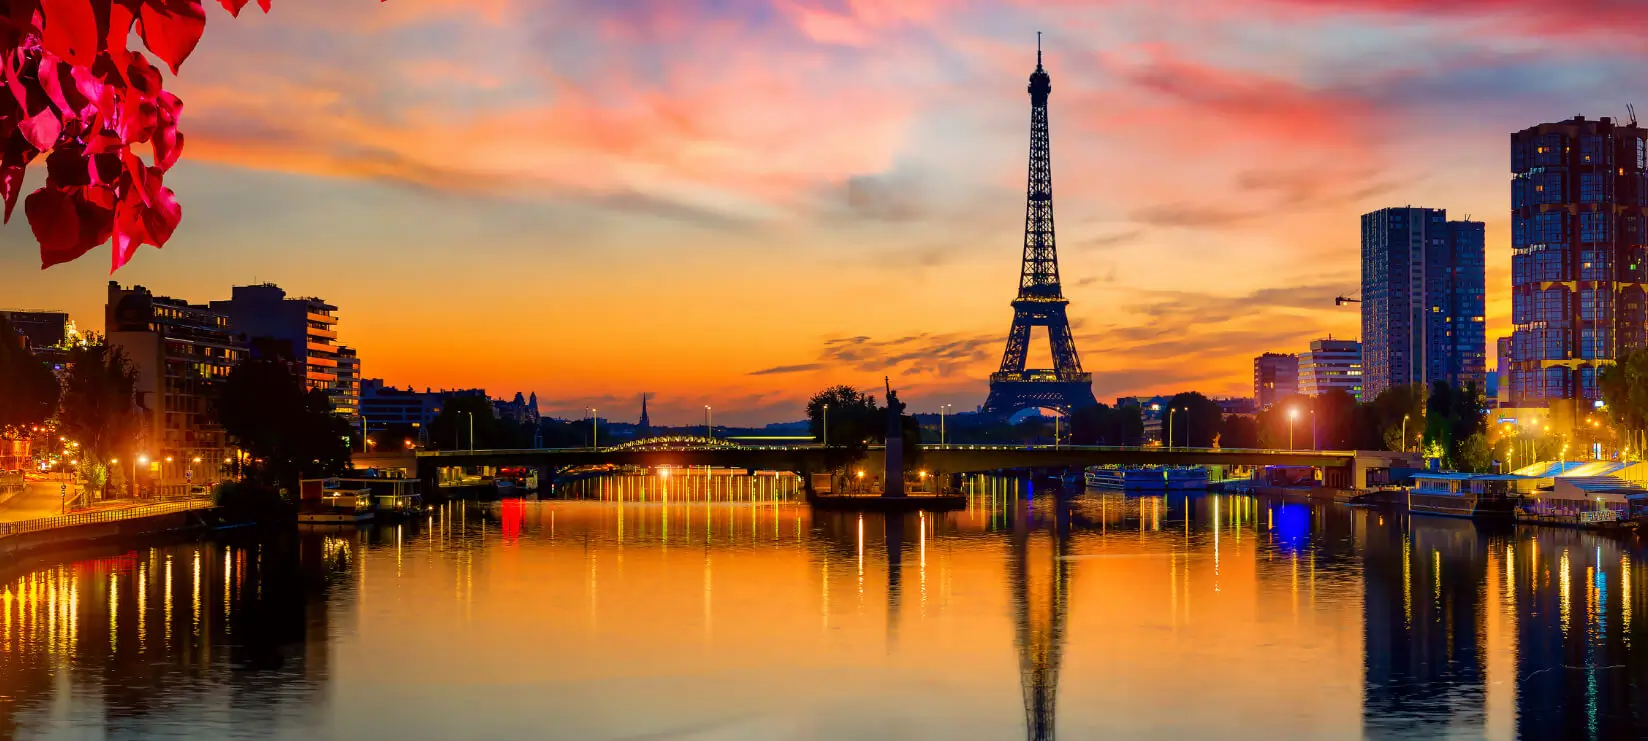 A view of the Eiffel tower at sunset.